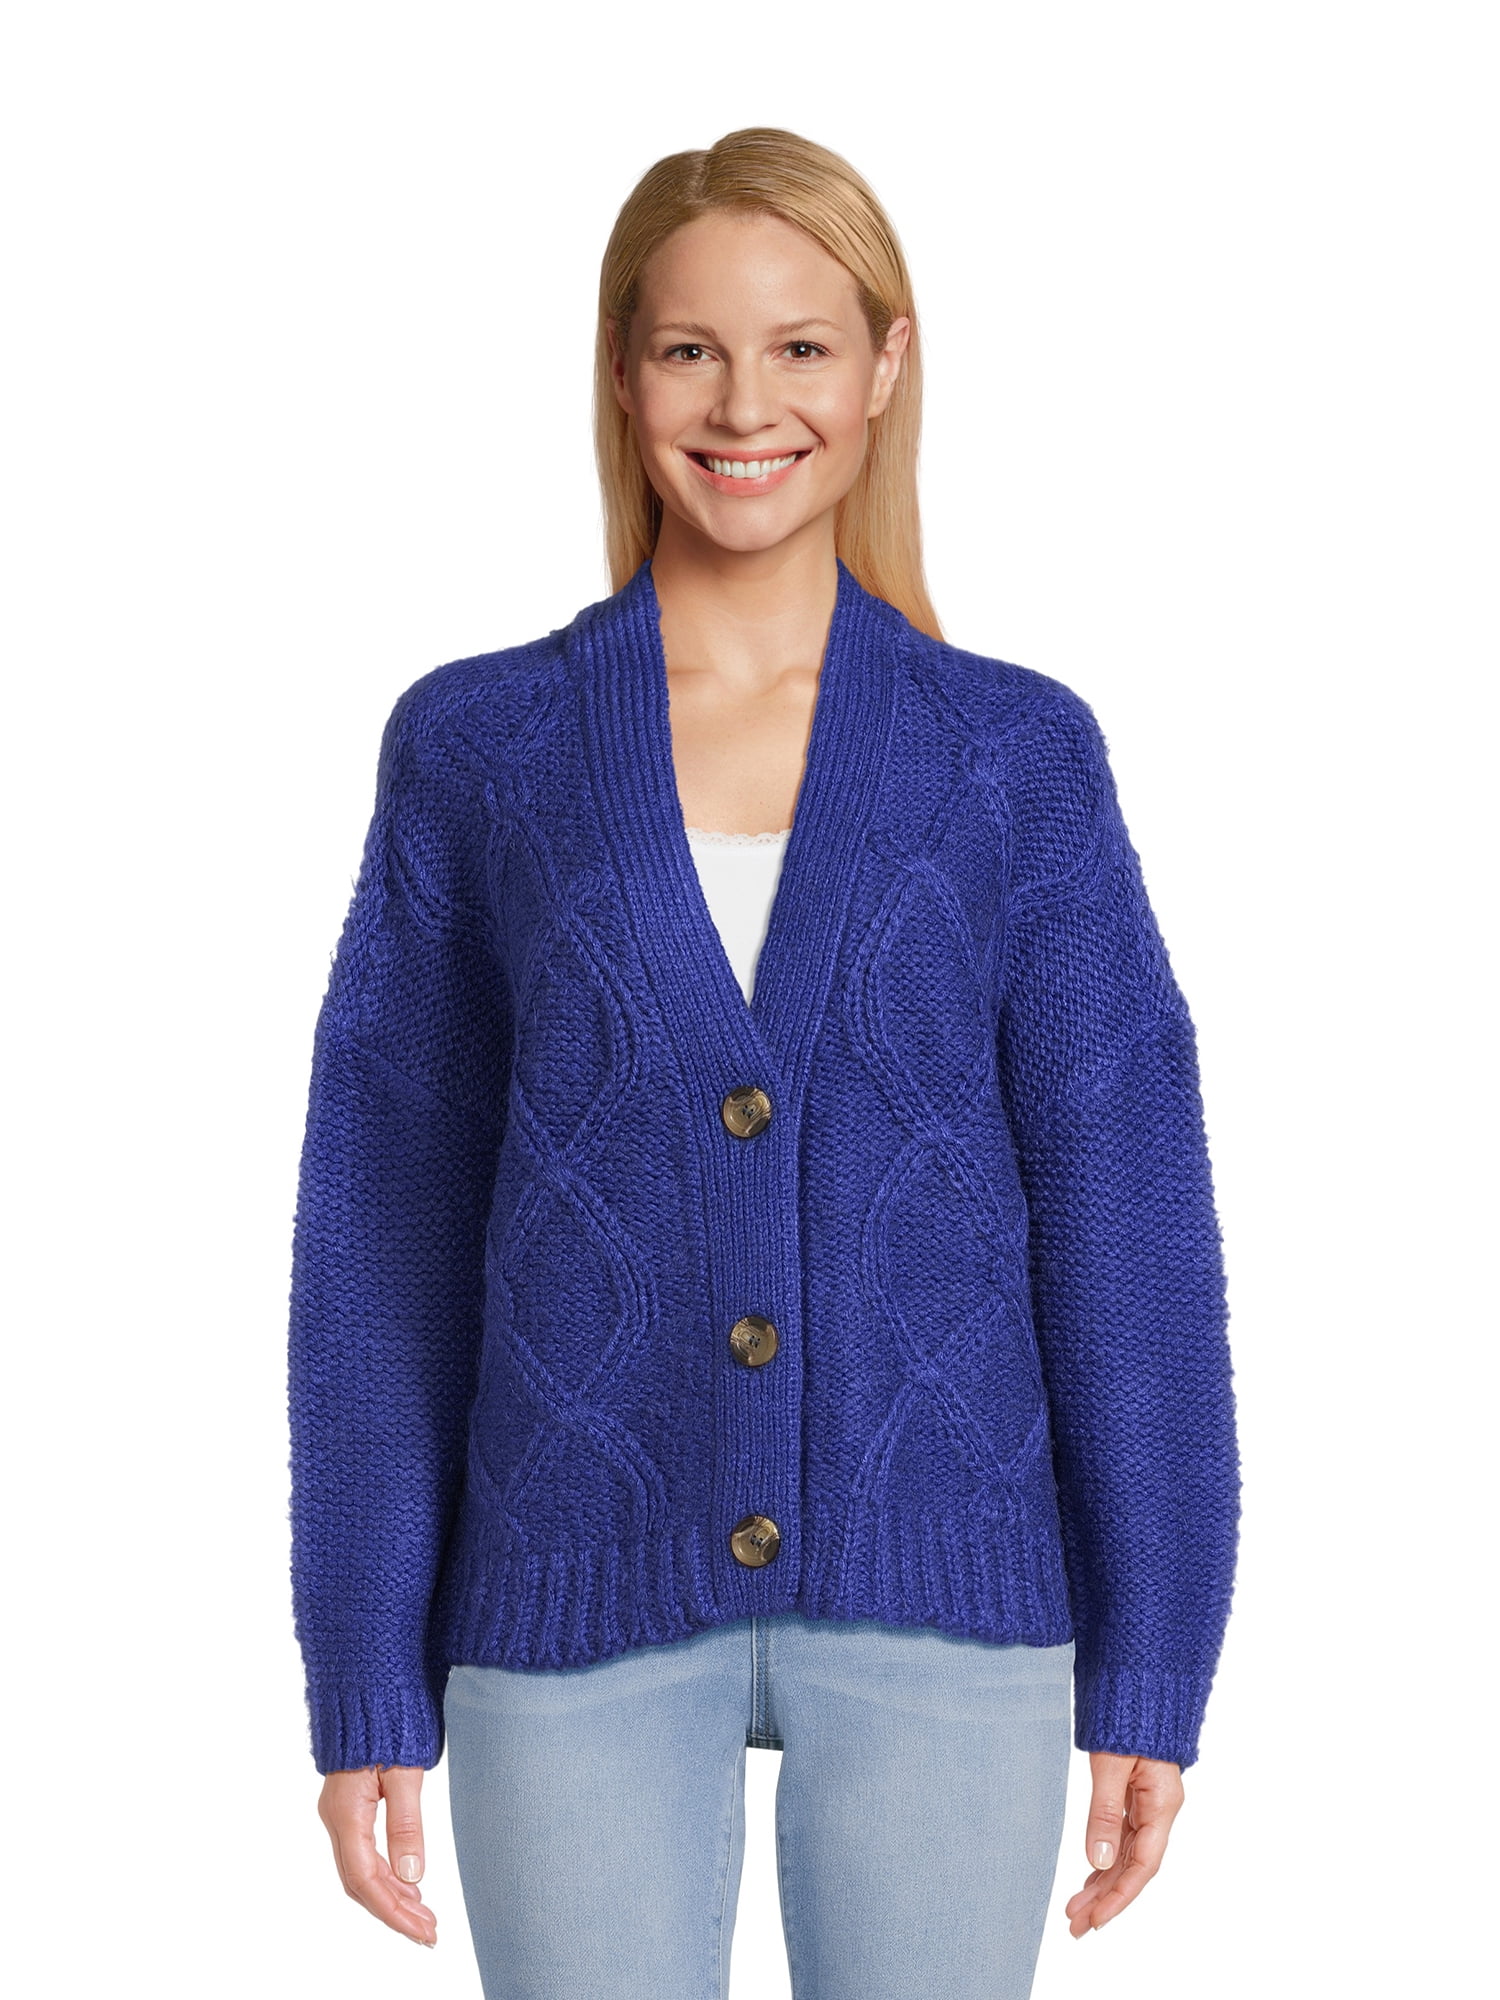 RD Style Women’s Cable Knit Cardigan, Sizes S-3XL - Walmart.com